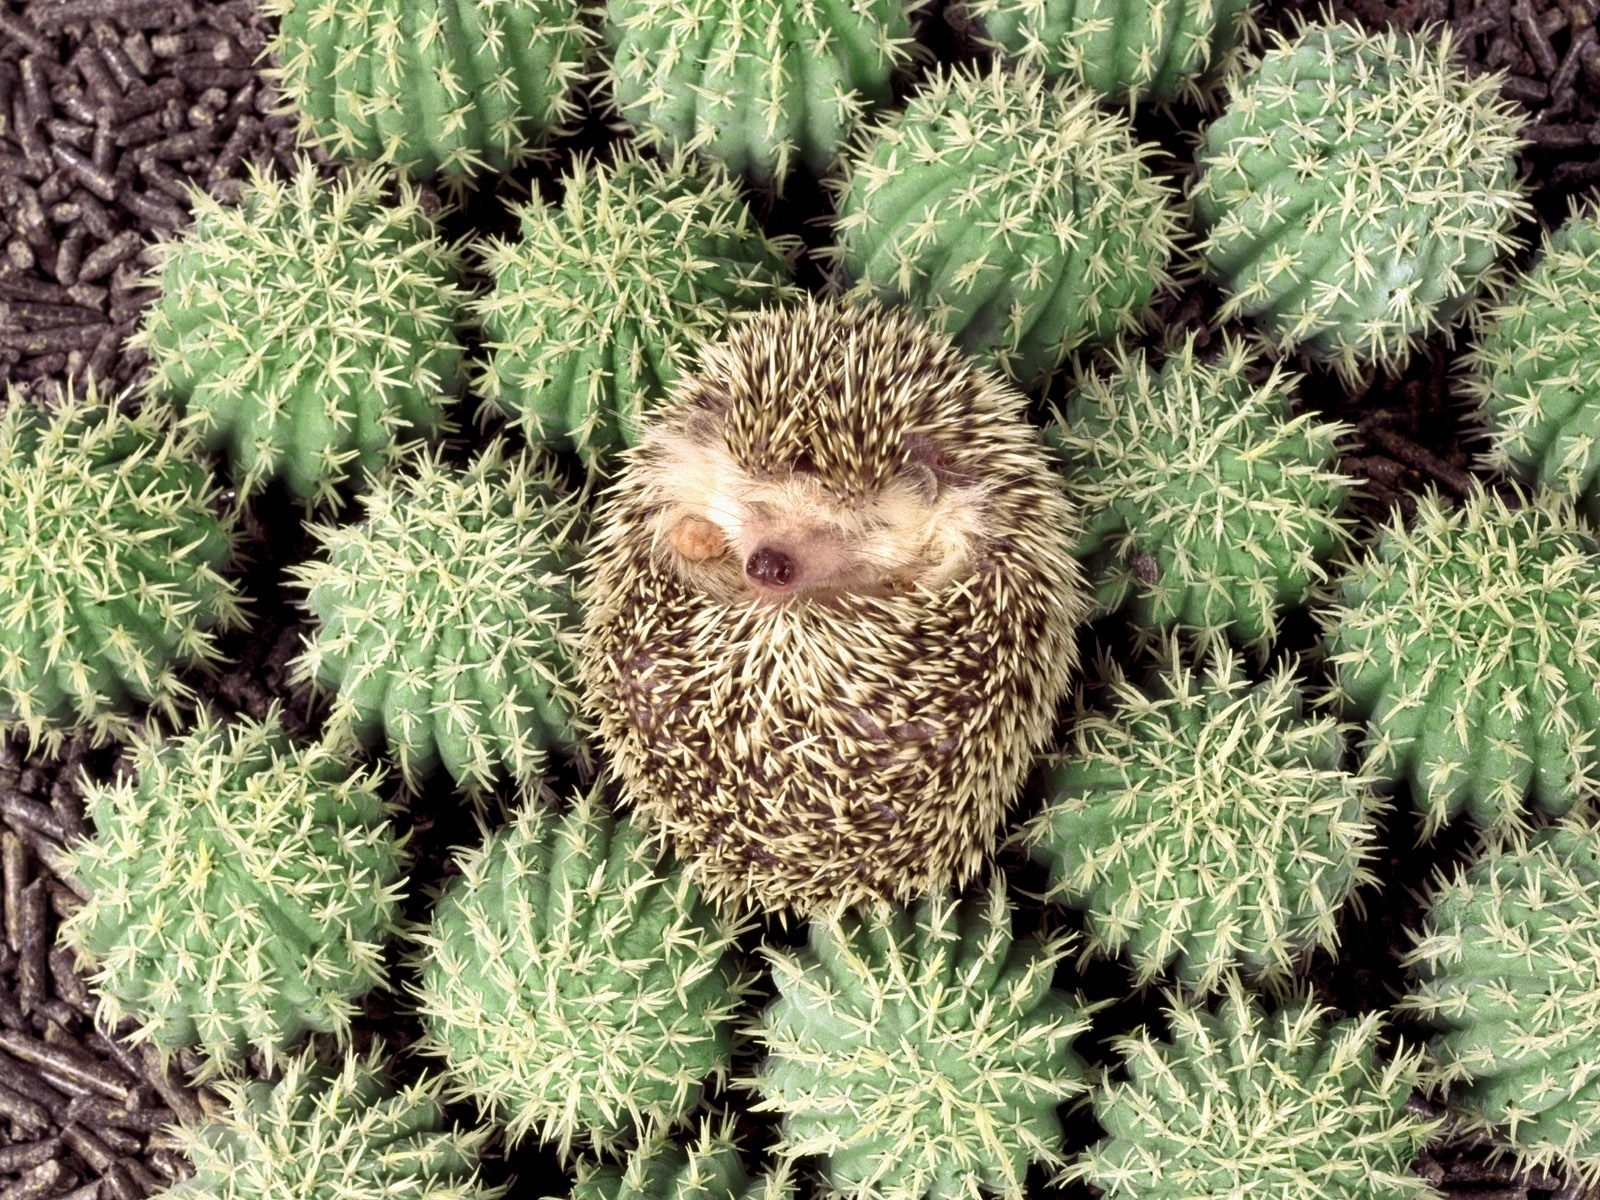 New Lock Screen Wallpapers animals, hedgehogs, cactuses